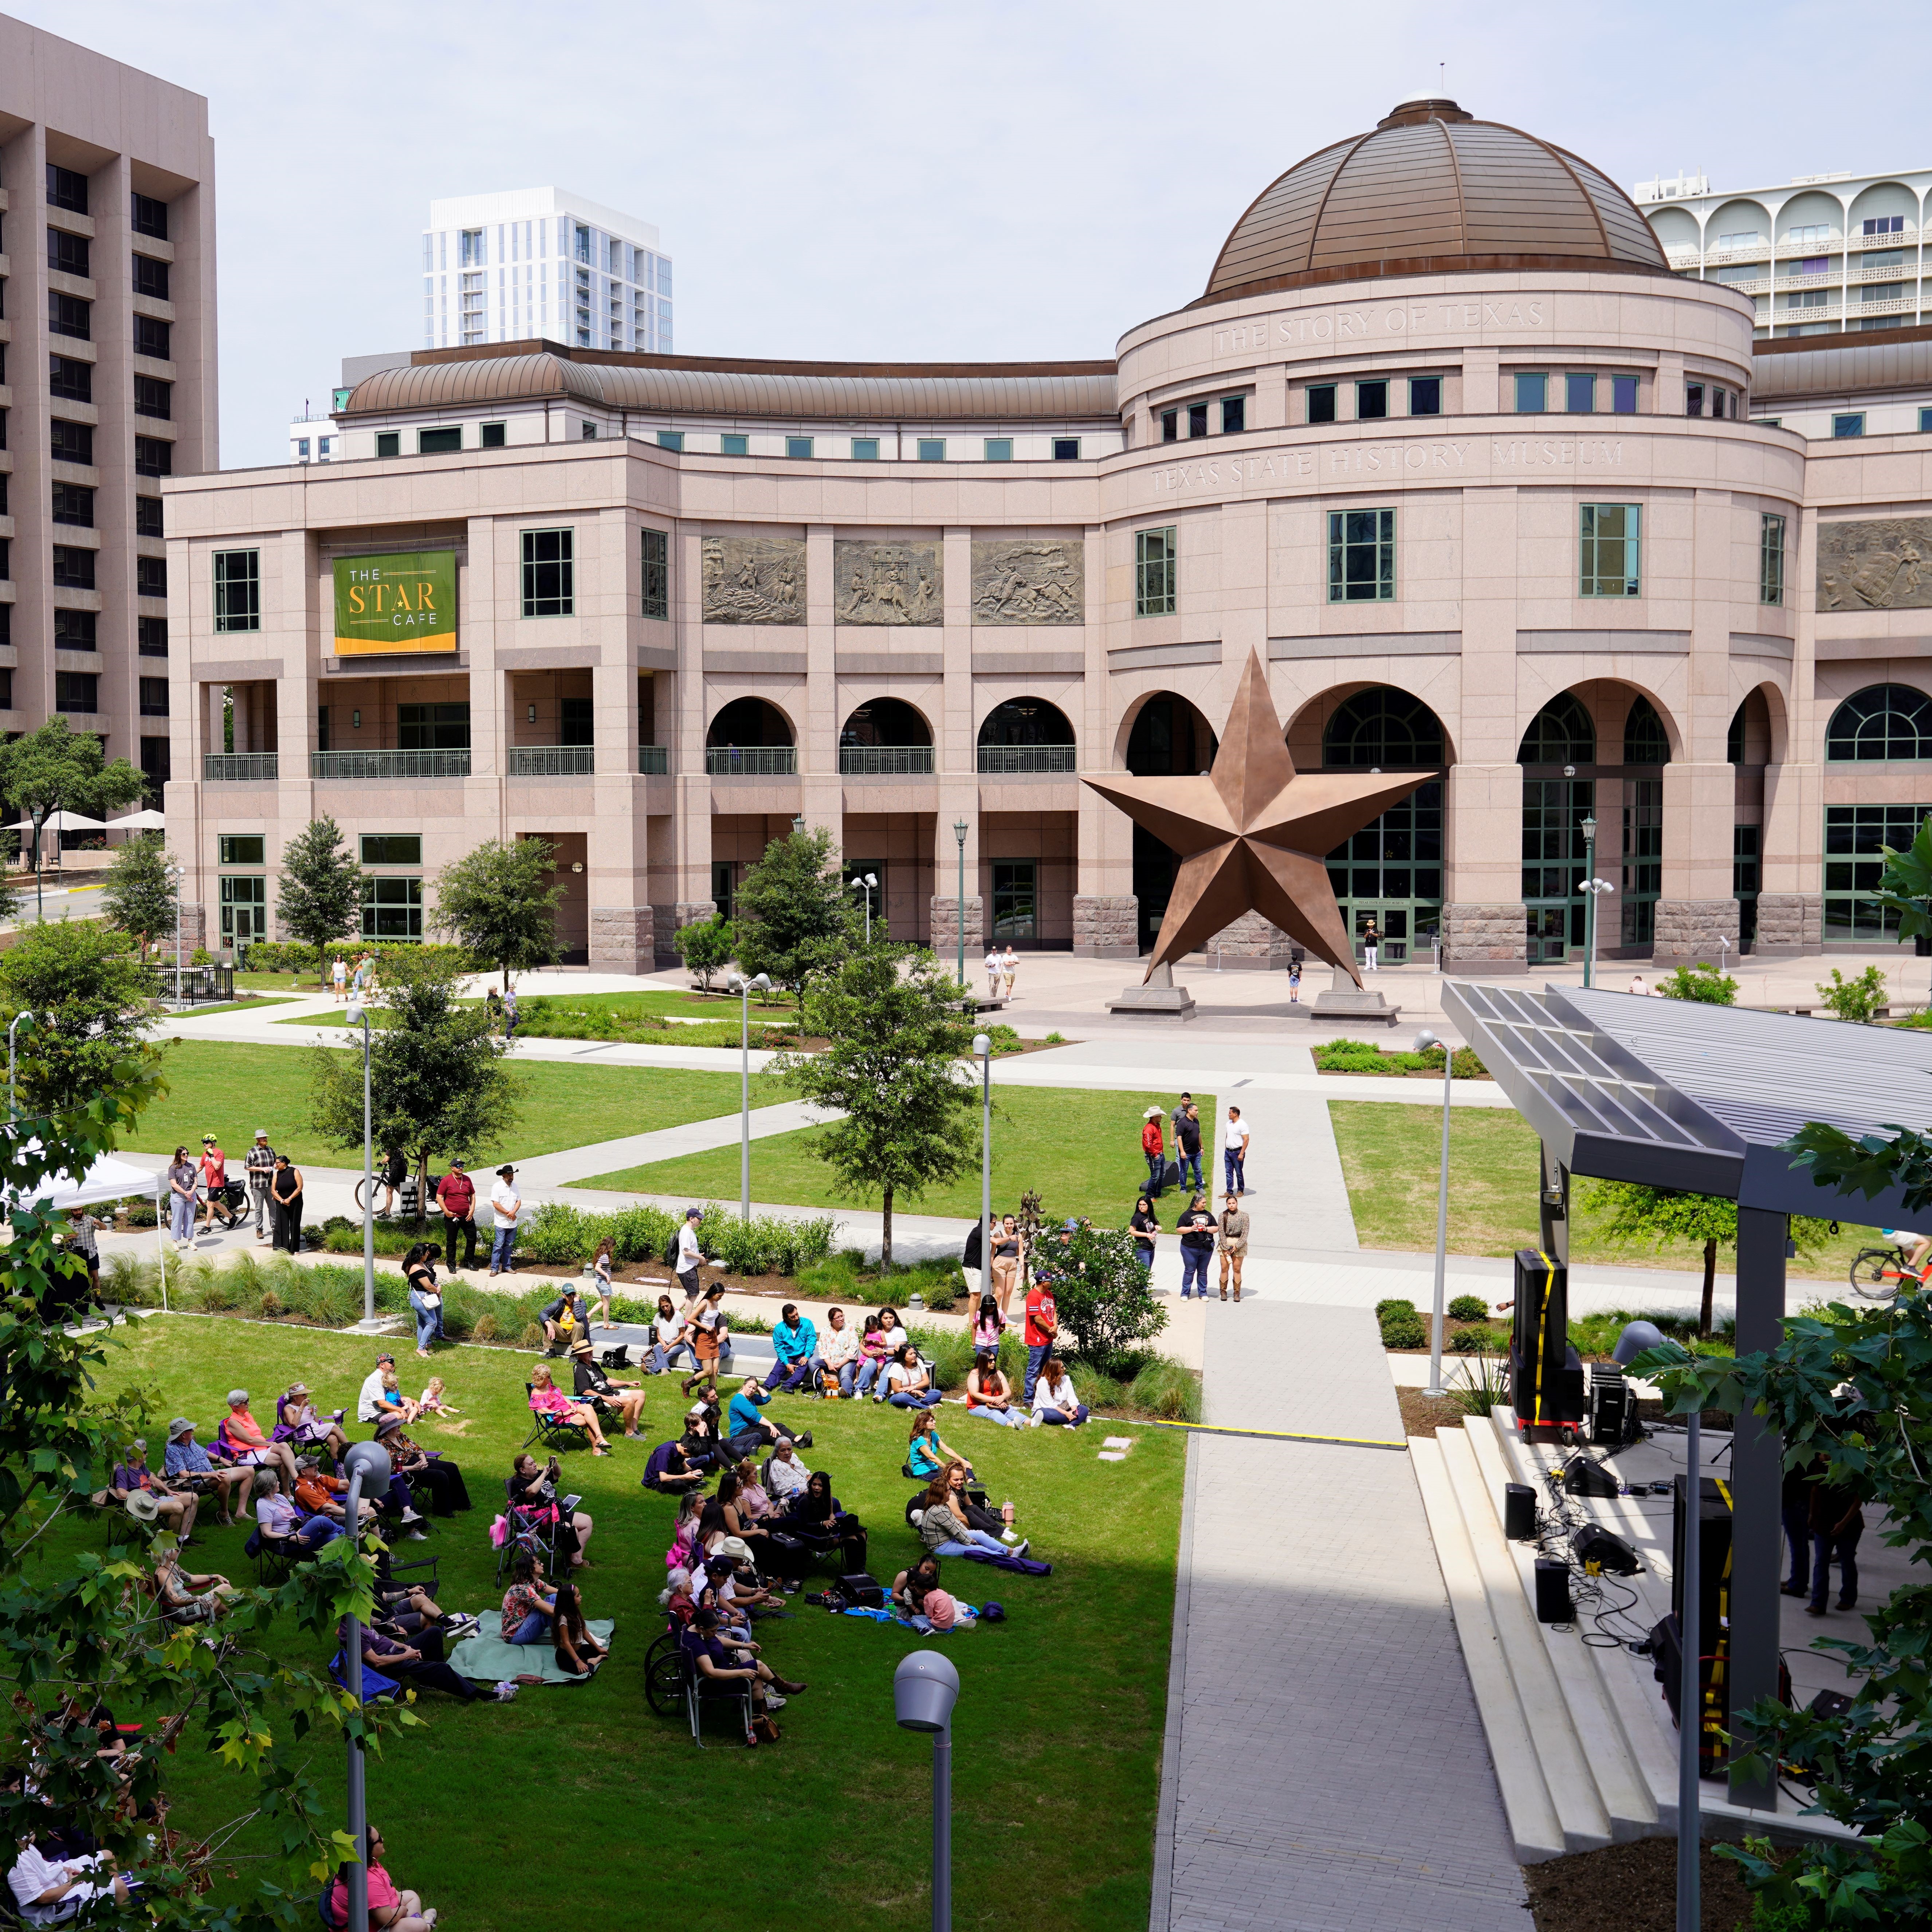 The Bullock Museum is excited to announce the return of Music Under the Star, a free summer outdoor concert series on the new Capitol Mall